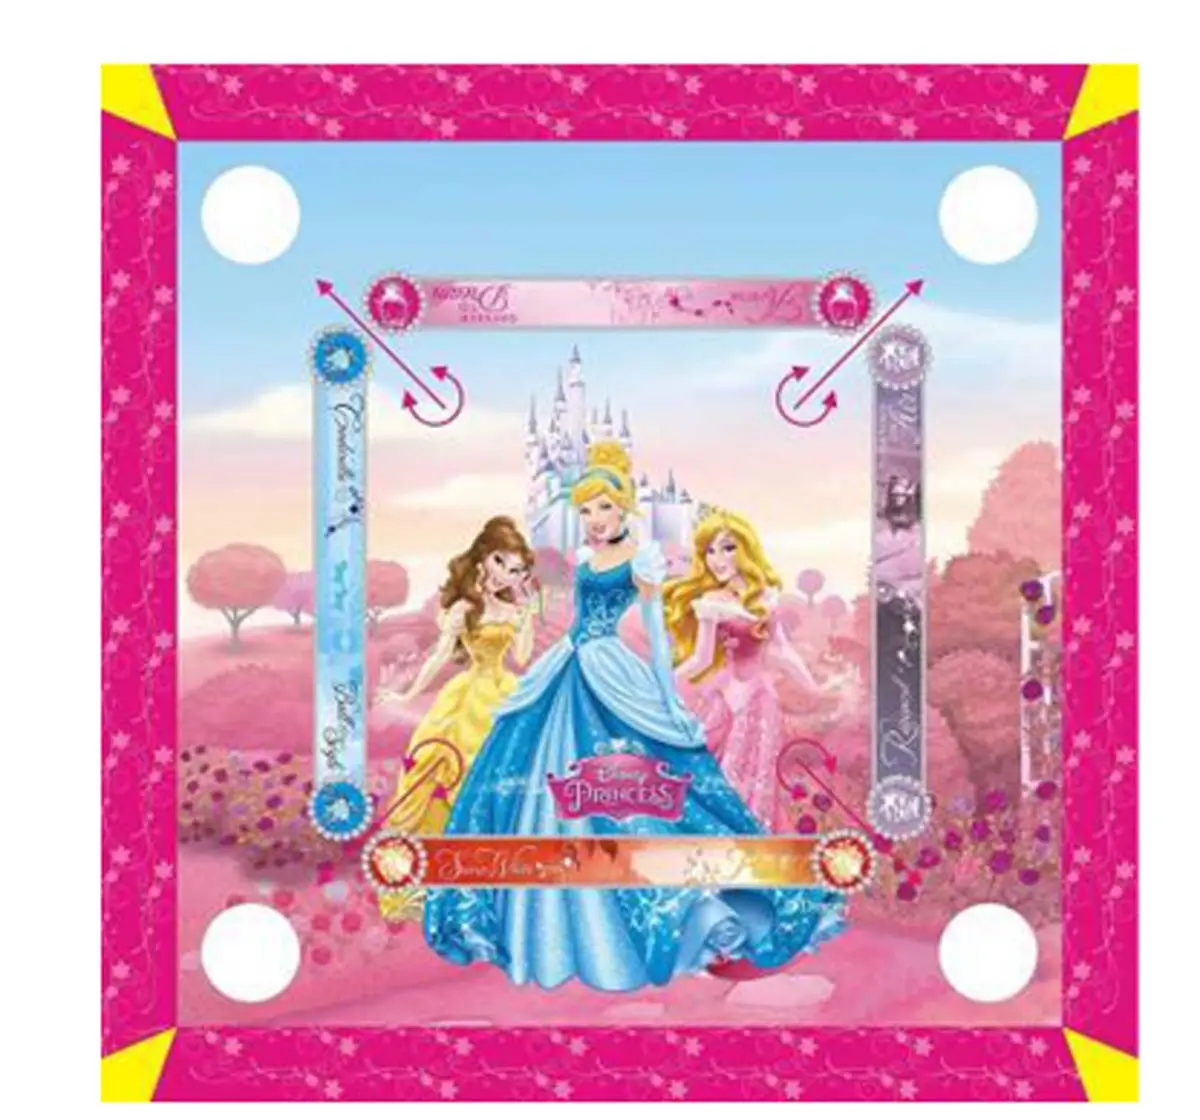 I Toys Disney Princess Carrom Board with Carrom Coins Indoor Sports for Kids age 3Y+ 